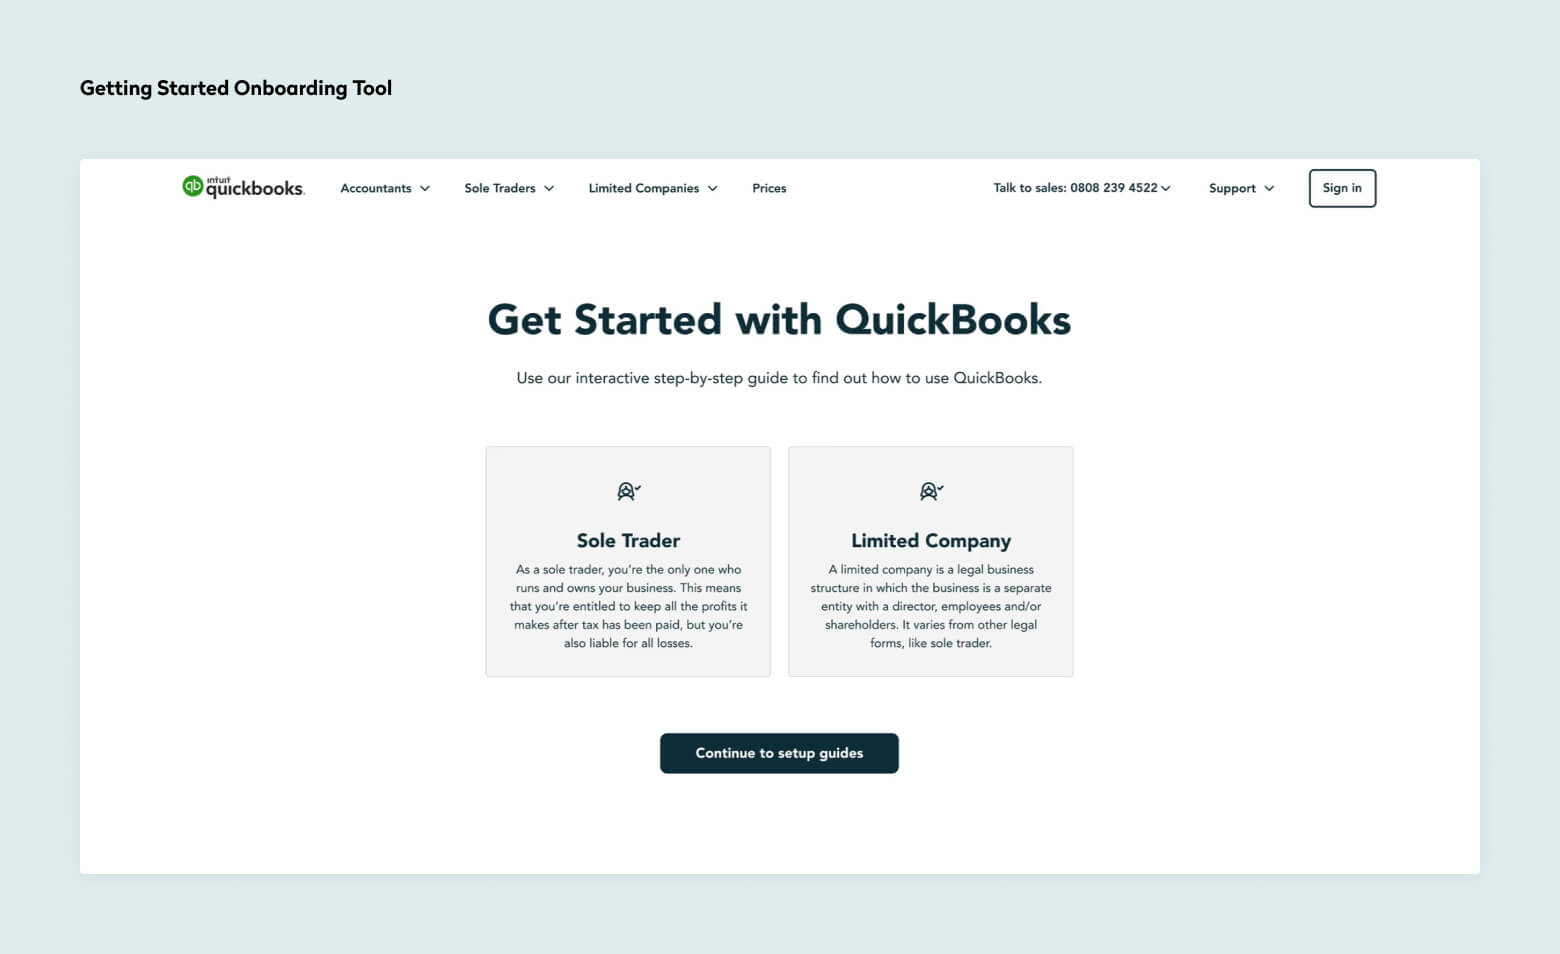 Getting started onboarding tool